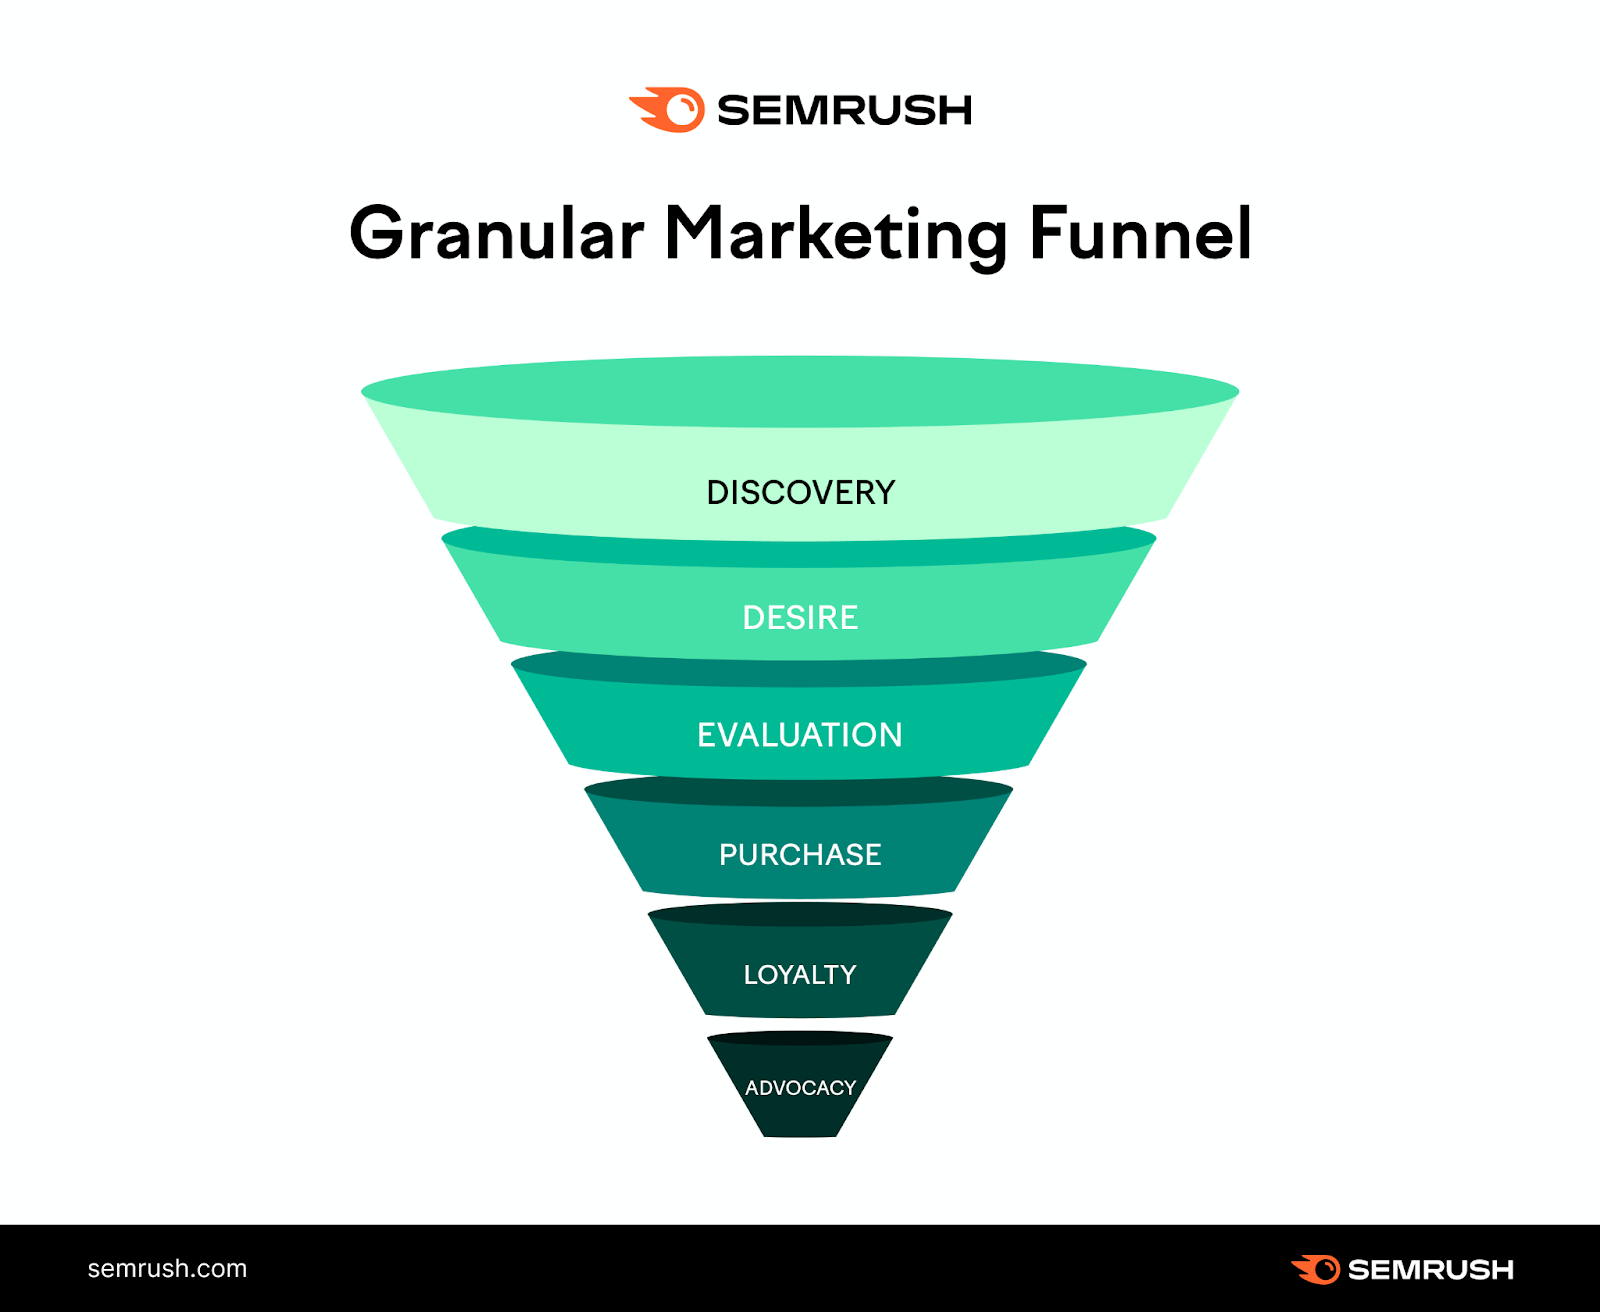 Granular marketing funnel with "Discovery," "Desire," "Evaluation," "Purchase," "Loyalty," and "Advocacy" stages